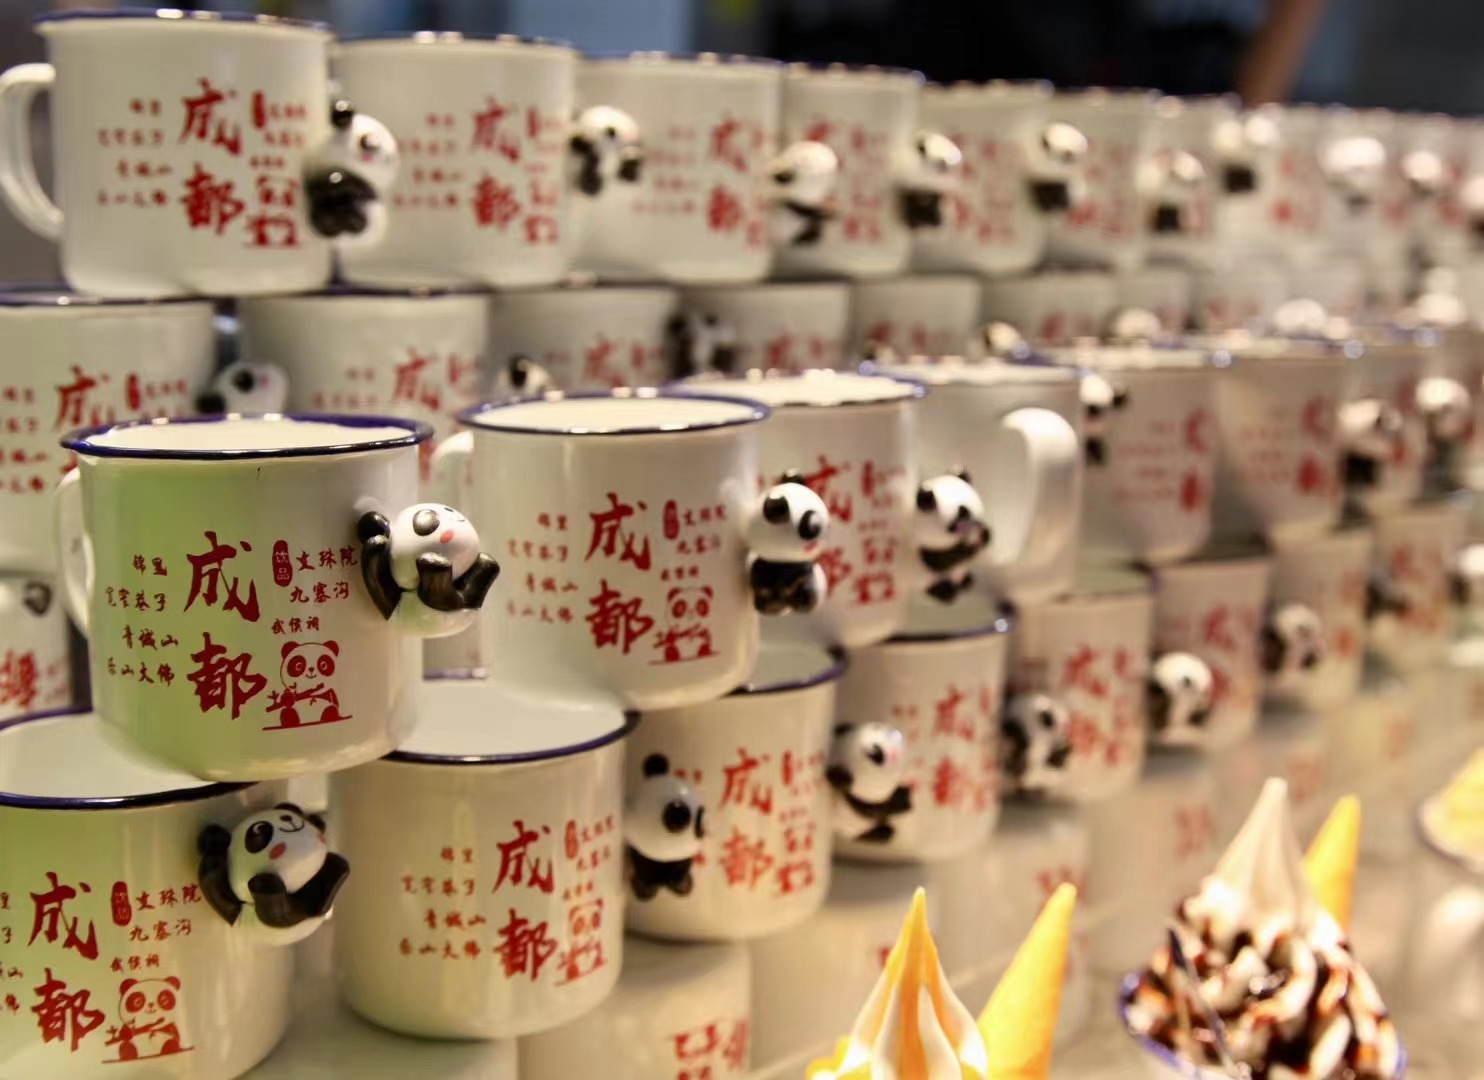 Cups for ice cream are decorated with panda figurines at a store in Jinli Ancient Street in Chengdu, Sichuan Province. /CGTN